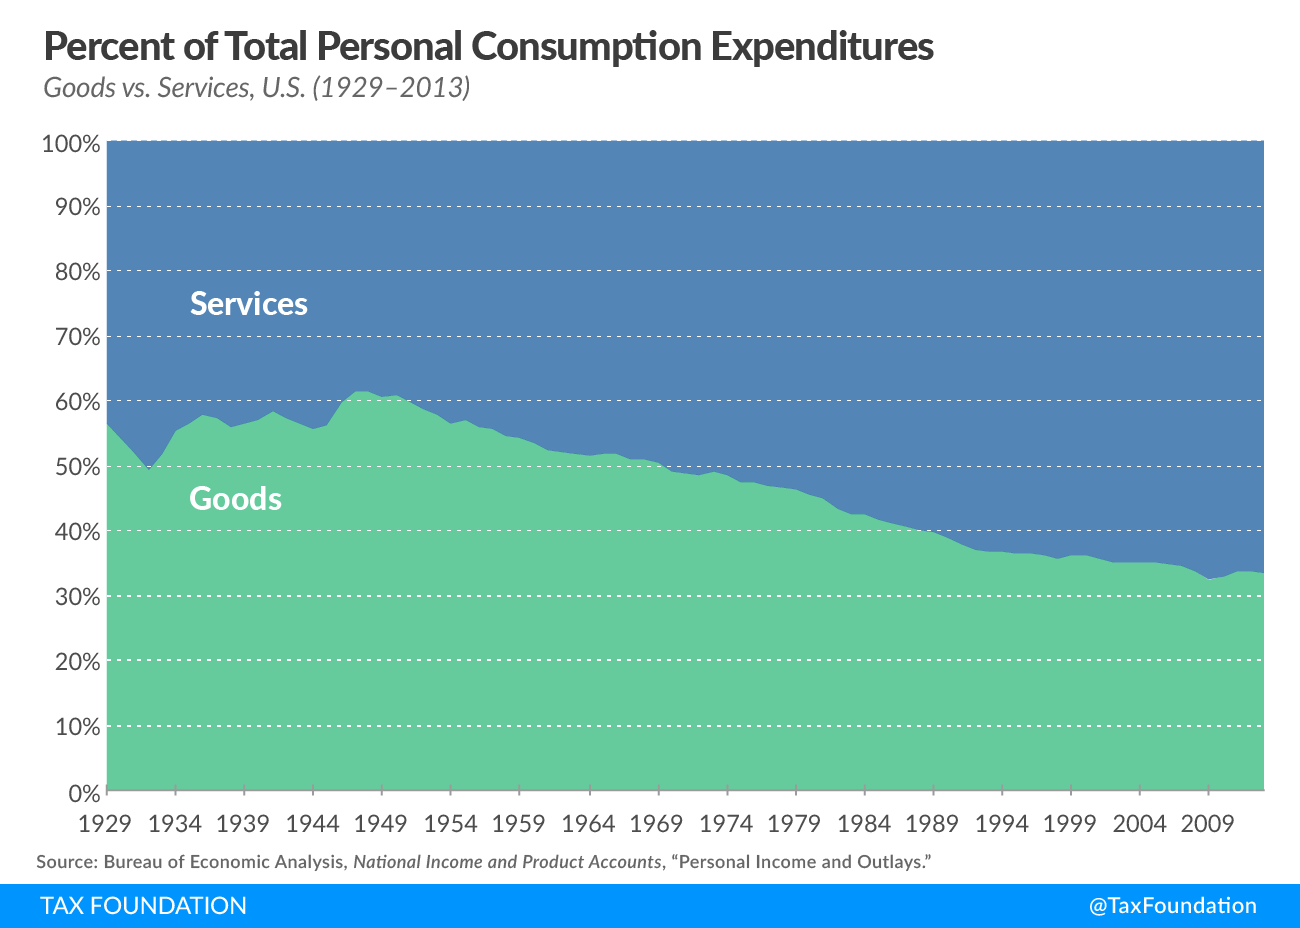 Percent of Total Personal Consumption Expenditures - Goods vs. Services